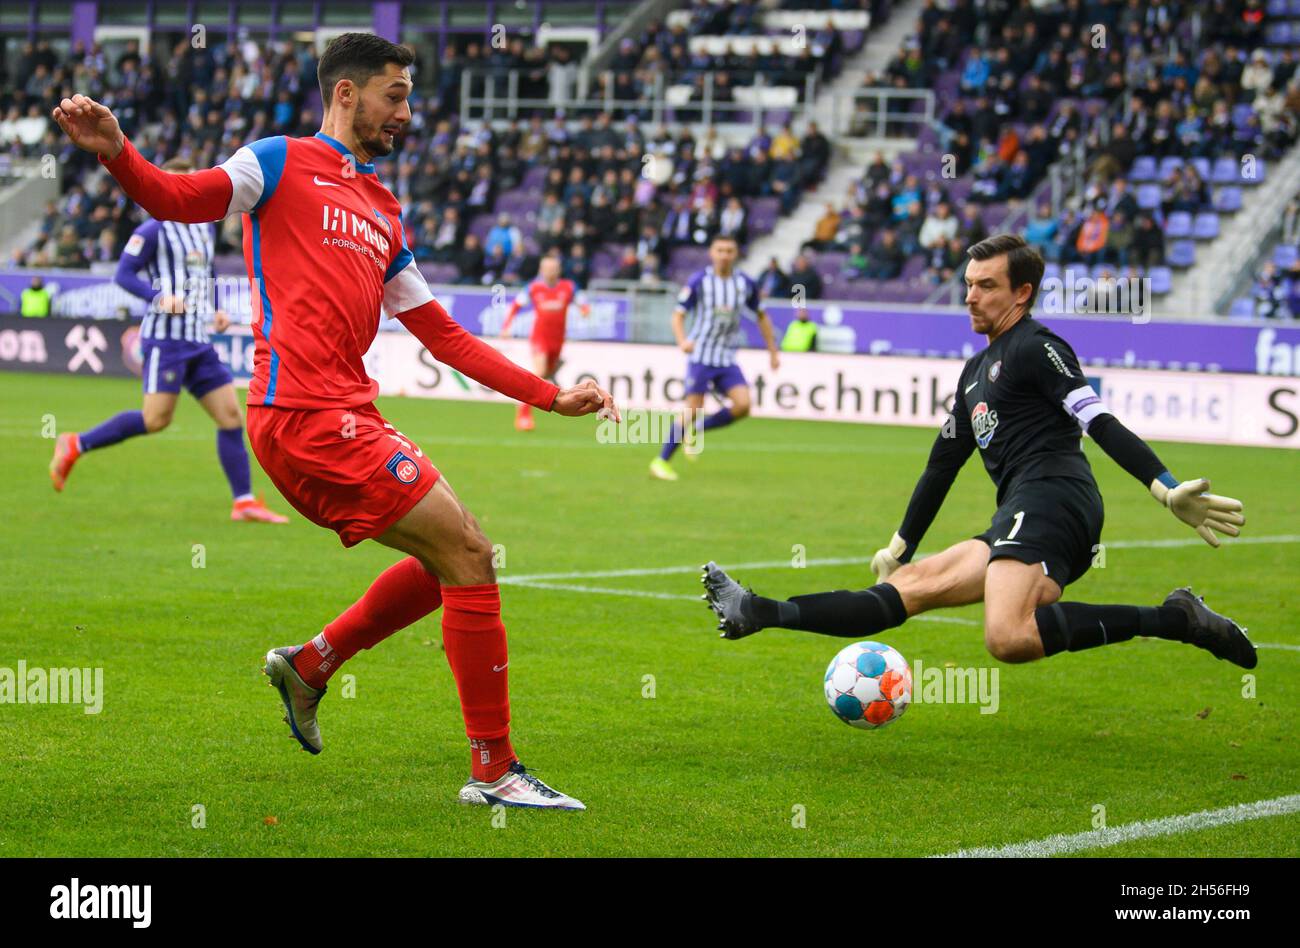 Aue, Germany. 07th Nov, 2021. Football: 2. Bundesliga, Erzgebirge Aue - 1. FC Heidenheim, Matchday 13, Erzgebirgsstadion. Aue's goalkeeper Martin Männel (r) saves a shot from Heidenheim's Tim Kleindienst. Credit: Robert Michael/dpa-Zentralbild/dpa - IMPORTANT NOTE: In accordance with the regulations of the DFL Deutsche Fußball Liga and/or the DFB Deutscher Fußball-Bund, it is prohibited to use or have used photographs taken in the stadium and/or of the match in the form of sequence pictures and/or video-like photo series./dpa/Alamy Live News Stock Photo